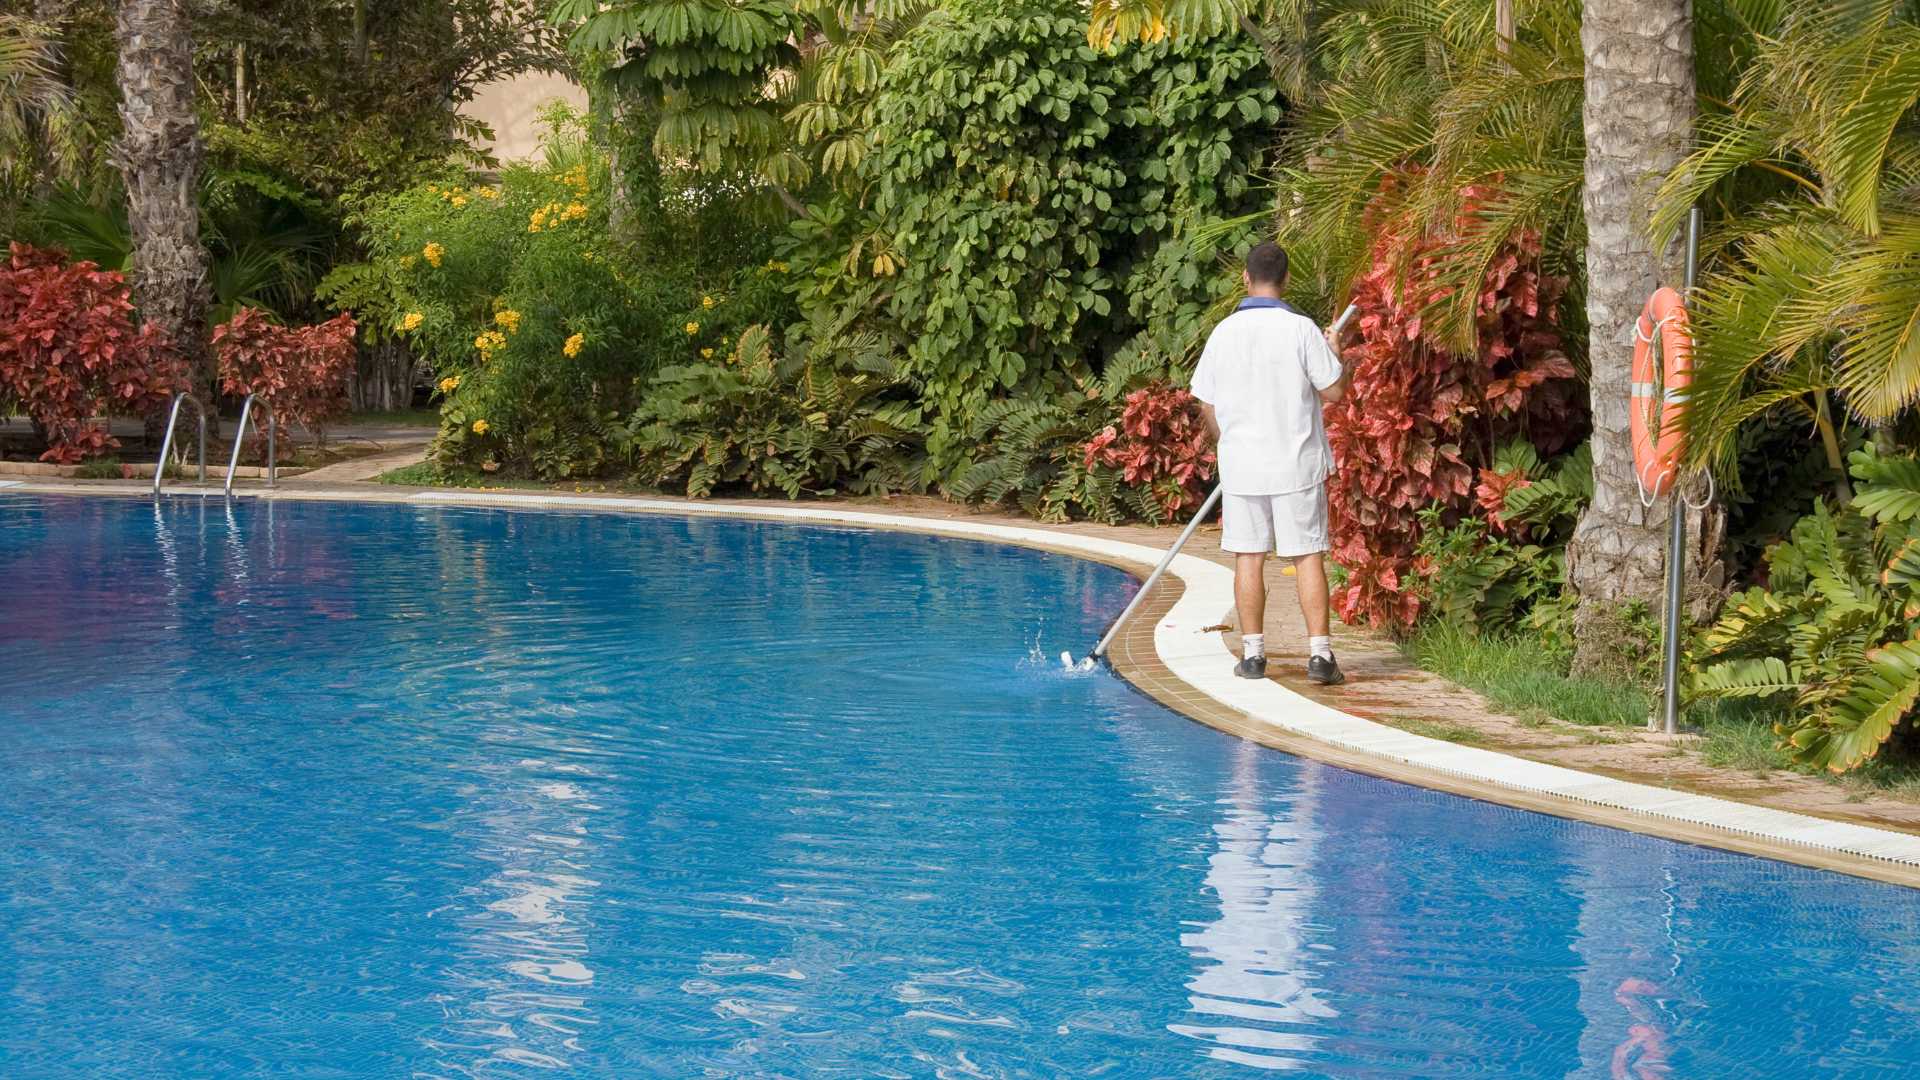 Person cleaning pool. Year-round pool care.